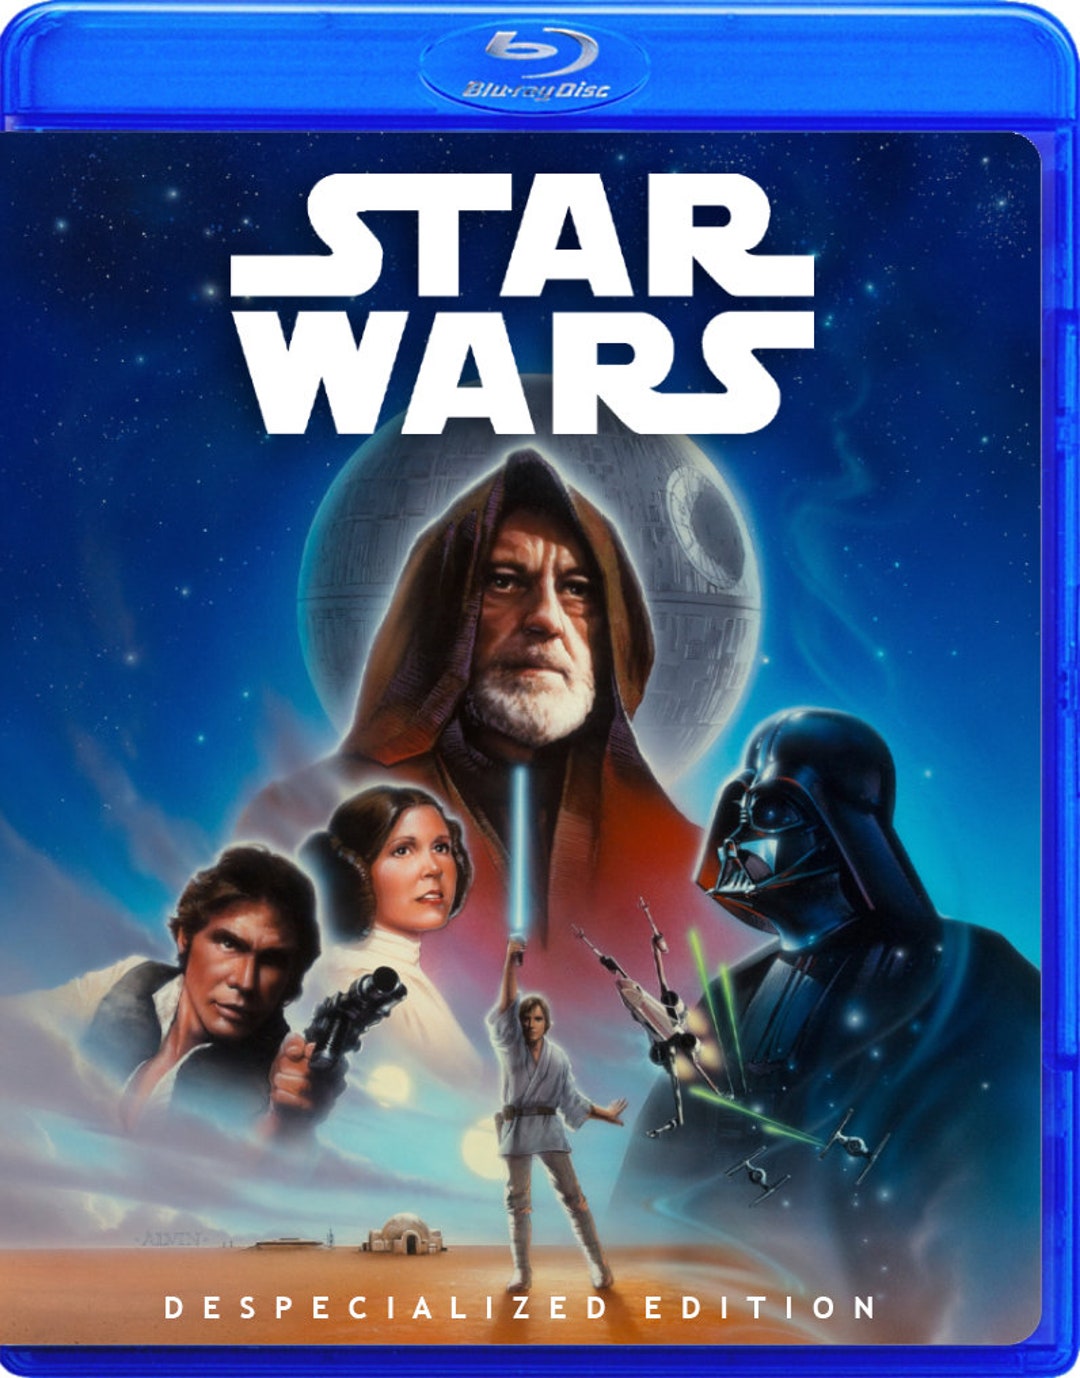 Star Wars 1977 Despecialized Edition Custom Blu-ray Cover no Blu-ray Disc -   UK